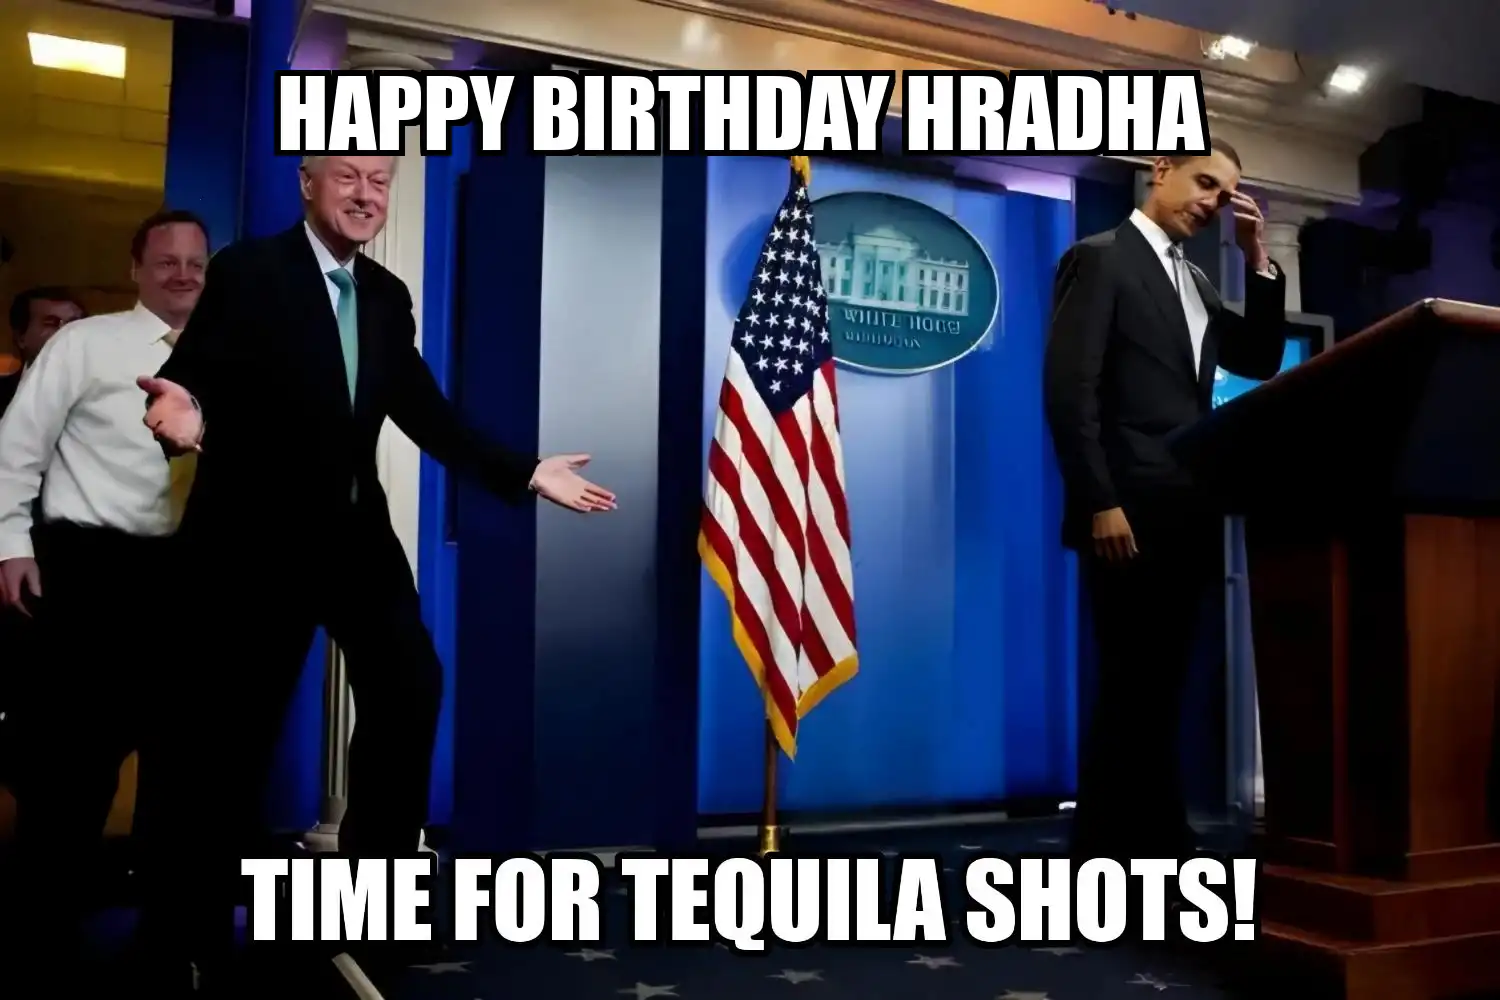 Happy Birthday Hradha Time For Tequila Shots Memes